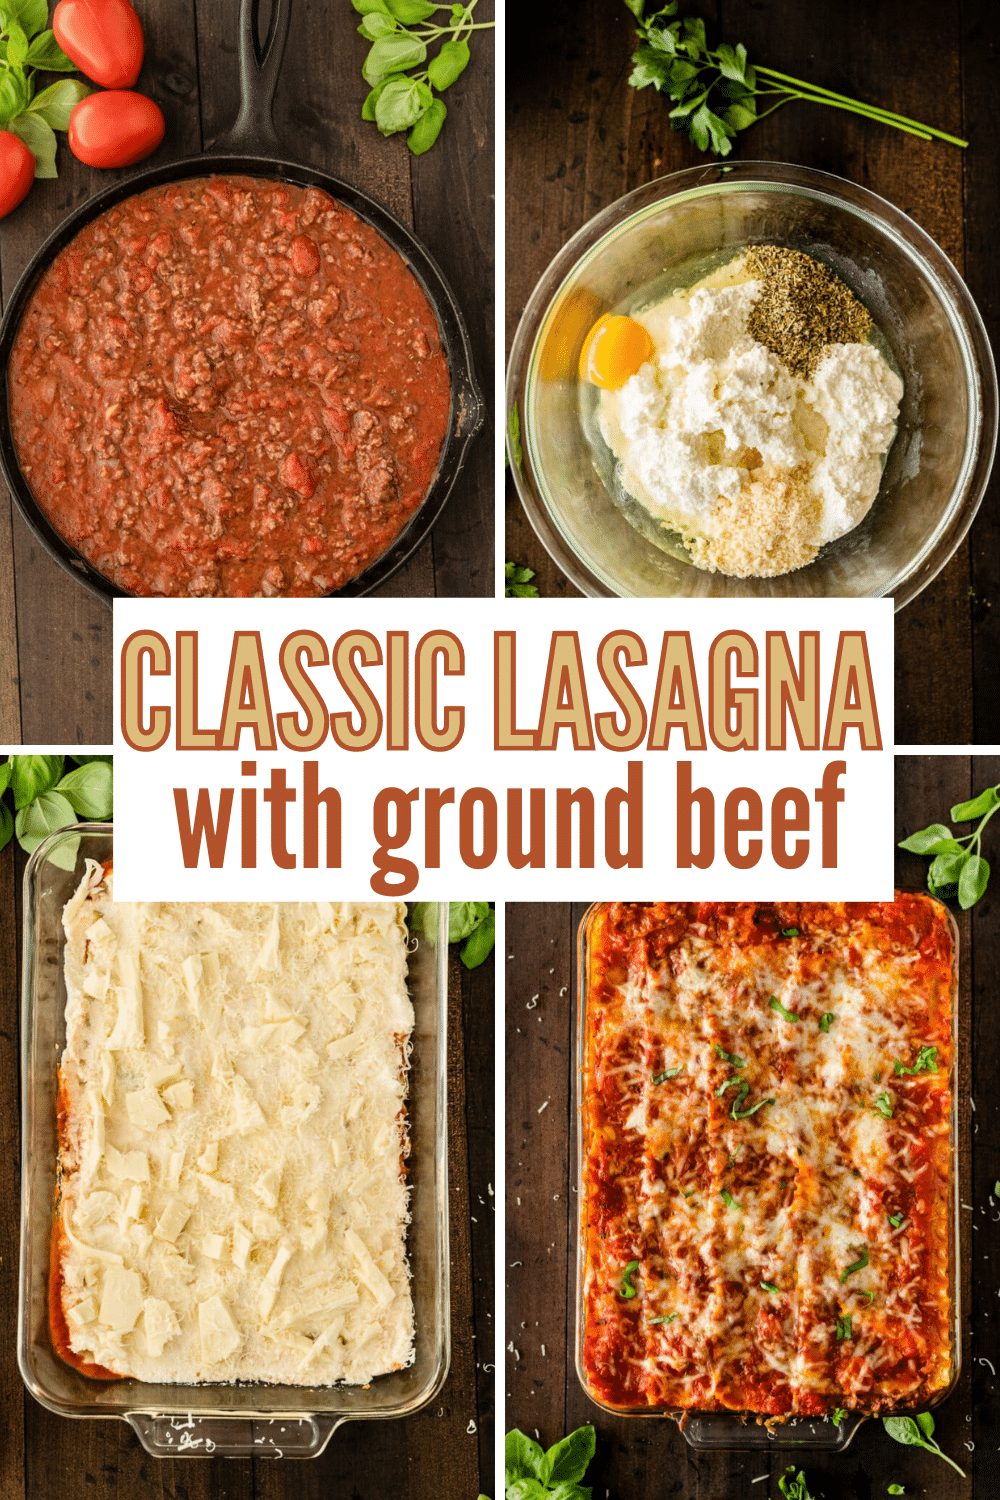 This Classic Lasagna Recipe with Ground Beef is an easy way to make homemade lasagna. Just 30 minutes of baking & your family will love it! #lasagna #groundbeef #recipe #homemade via @wondermomwannab